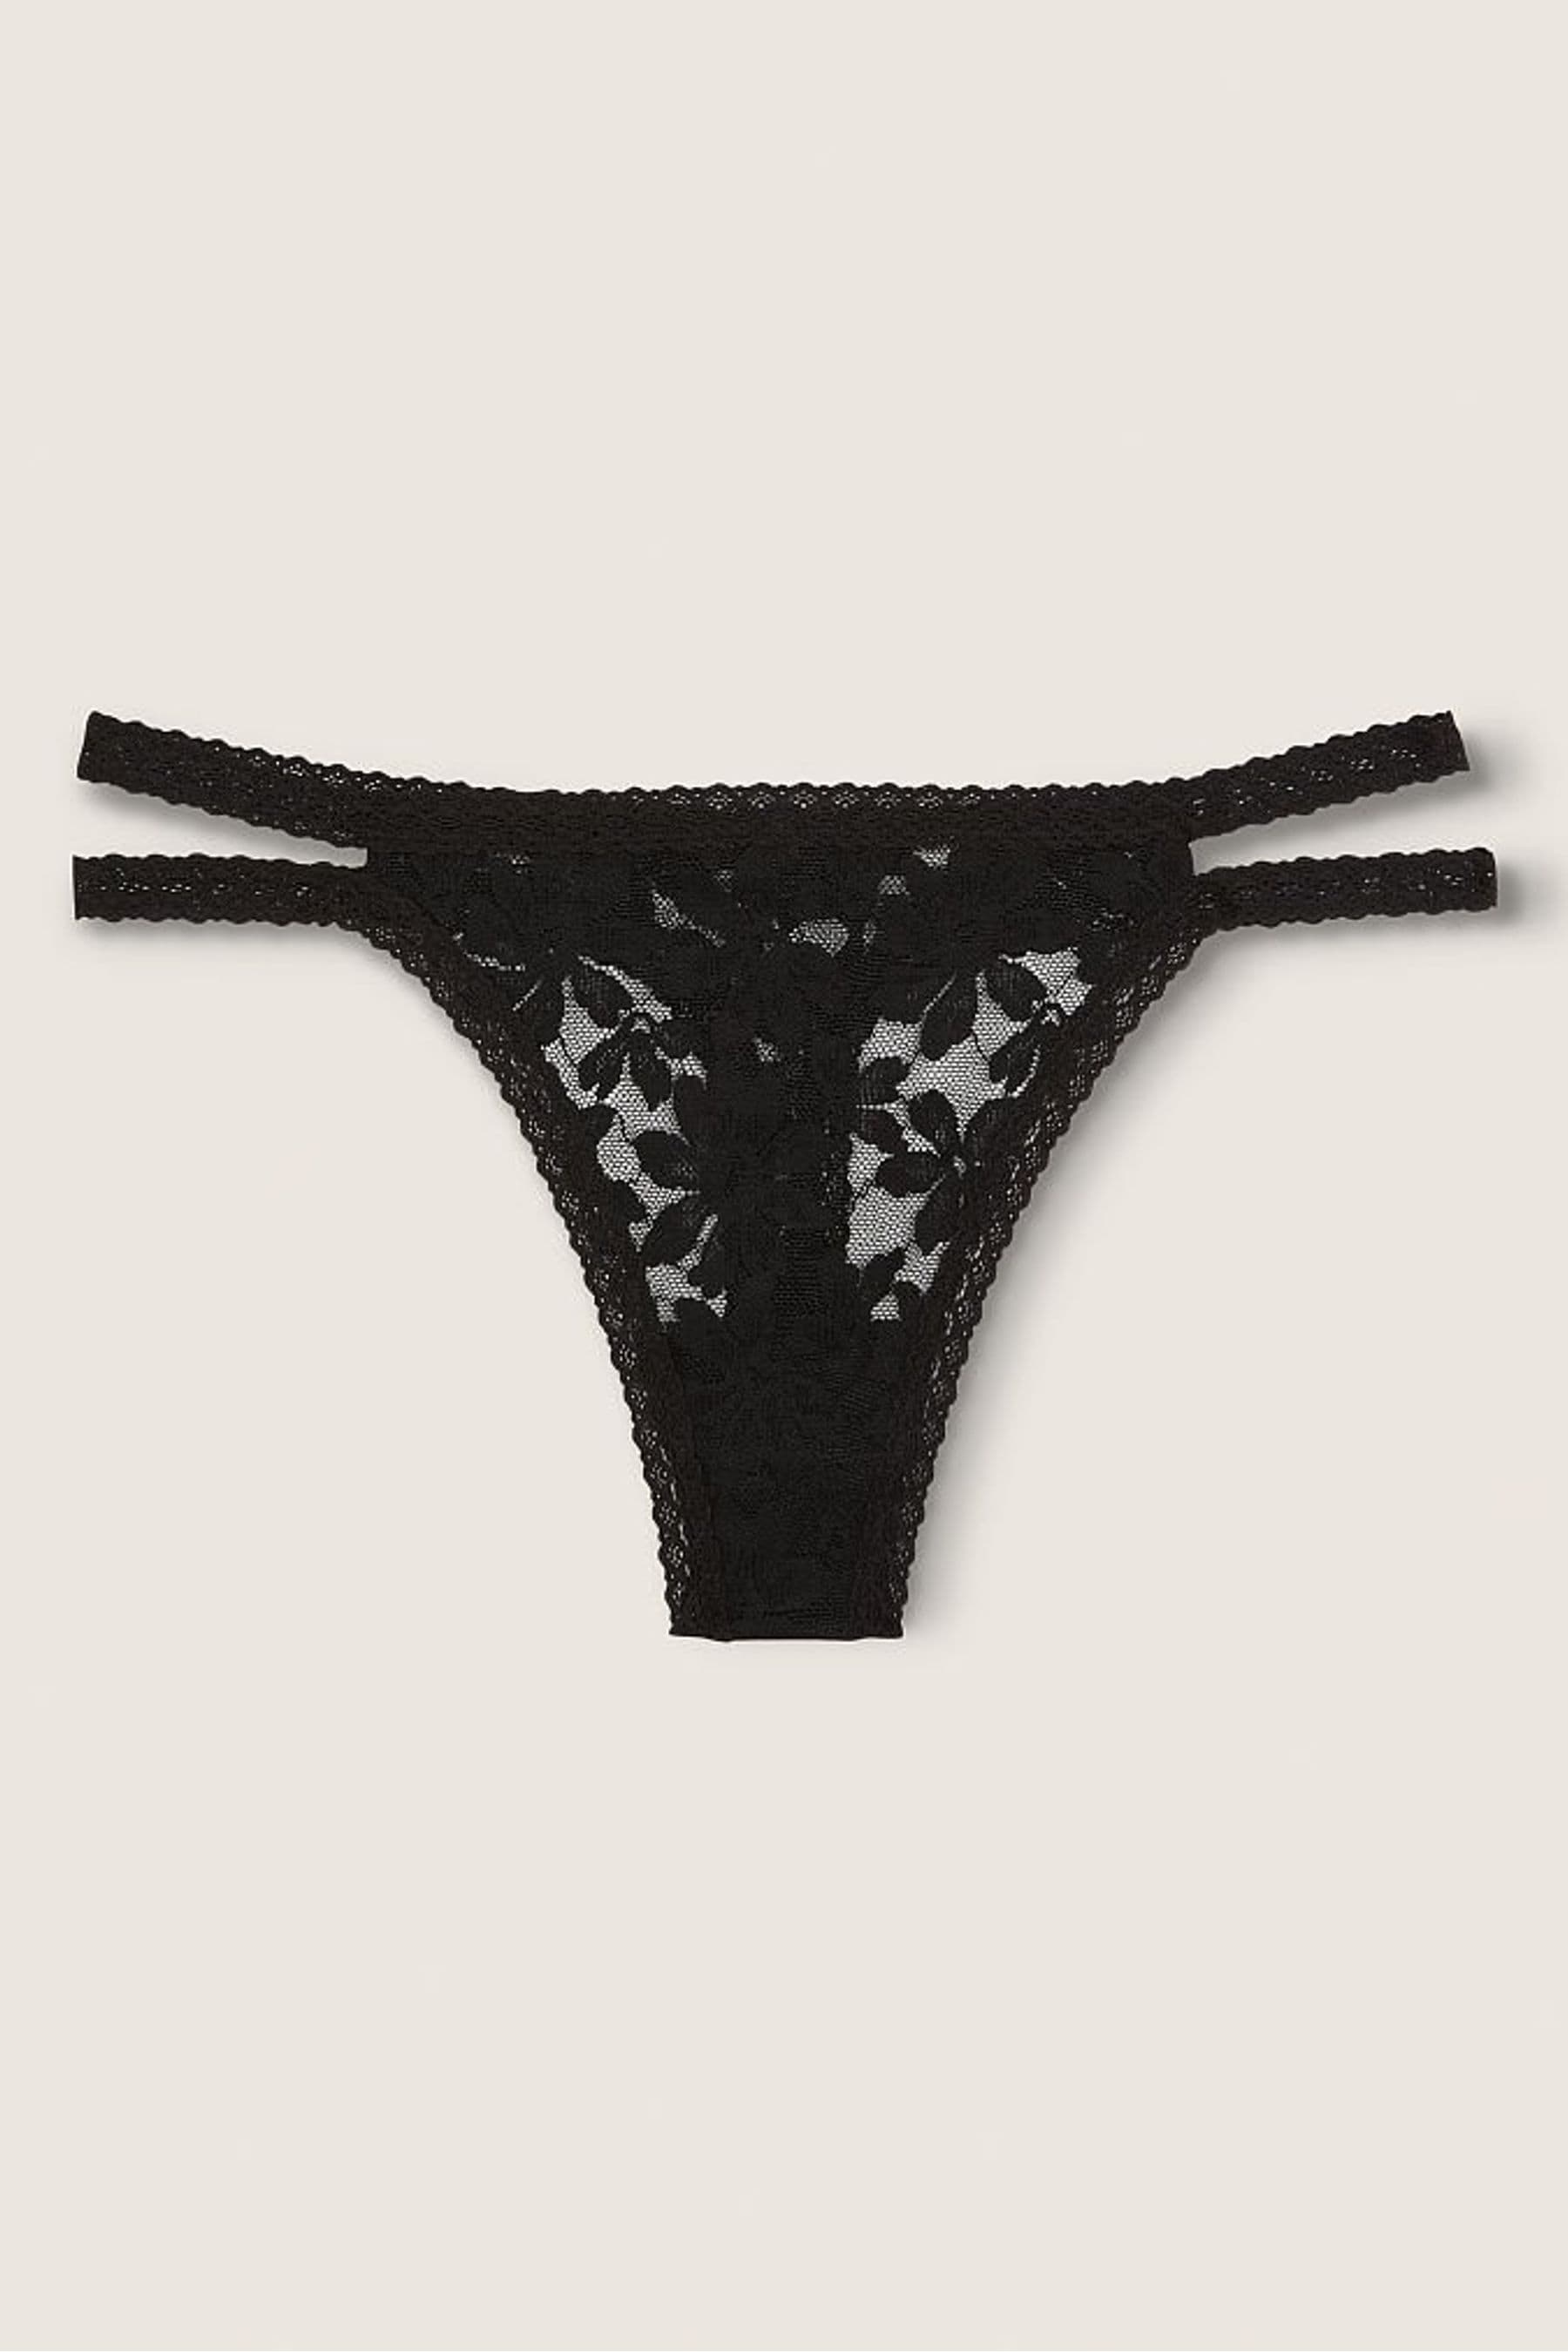 Buy Victoria S Secret Pink Strappy Lace Thong Knicker From The Victoria S Secret Uk Online Shop